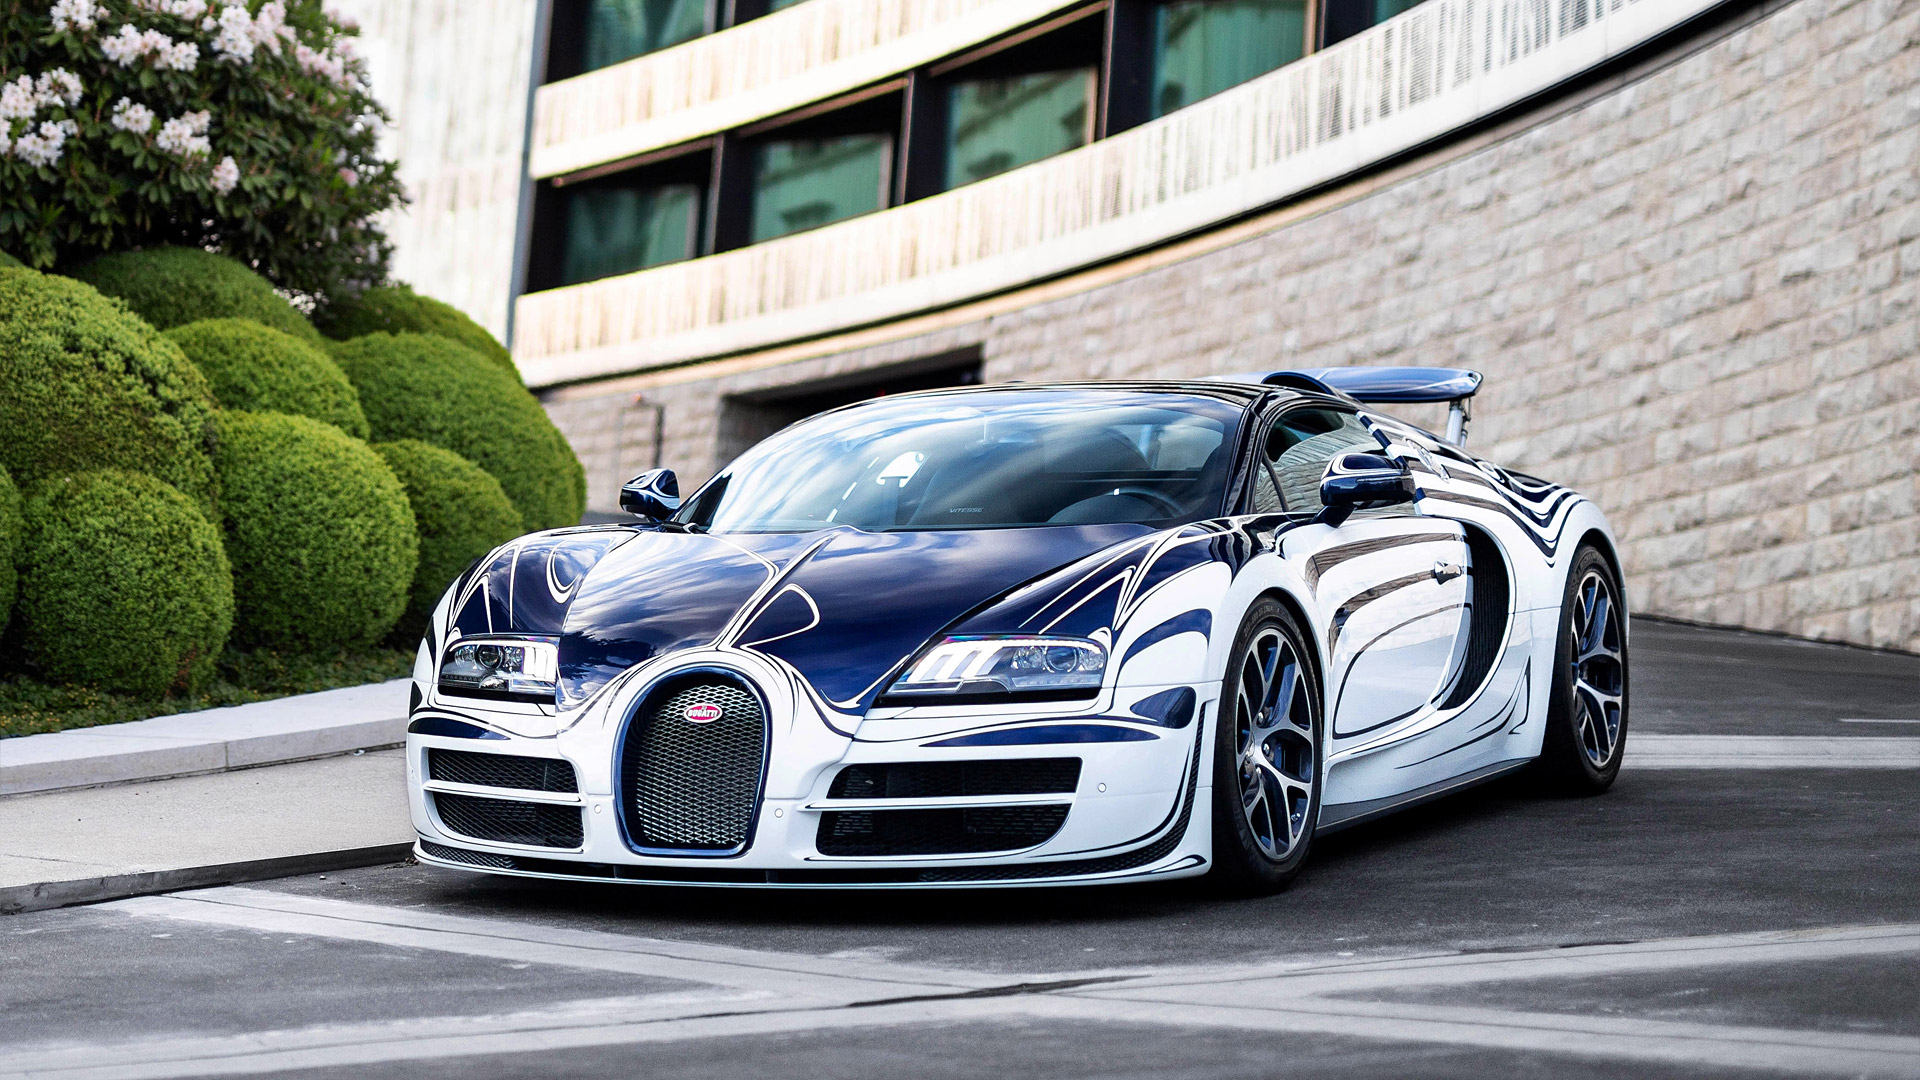 Remembering The Bugatti Veyron With These Special Edition Variants